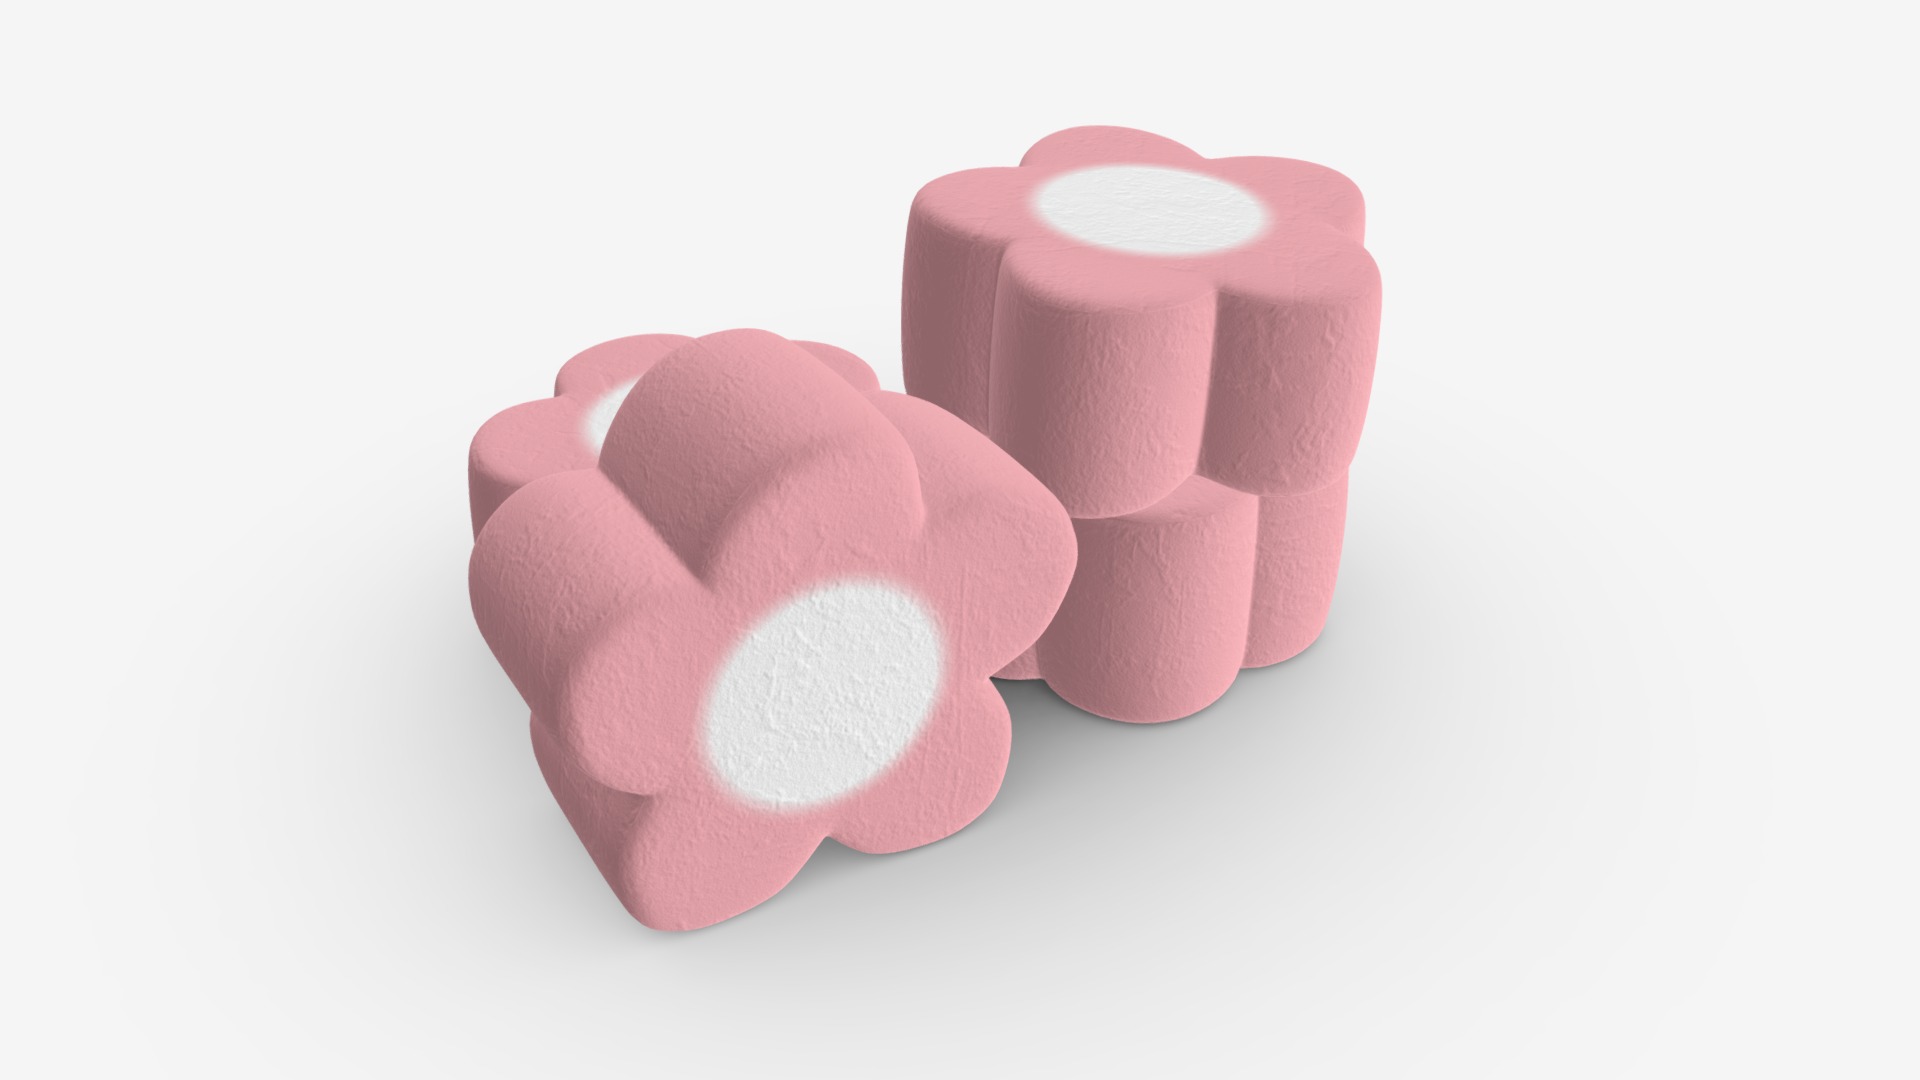 3D model Marshmallows candy flower shape - This is a 3D model of the Marshmallows candy flower shape. The 3D model is about a pink heart shaped object.